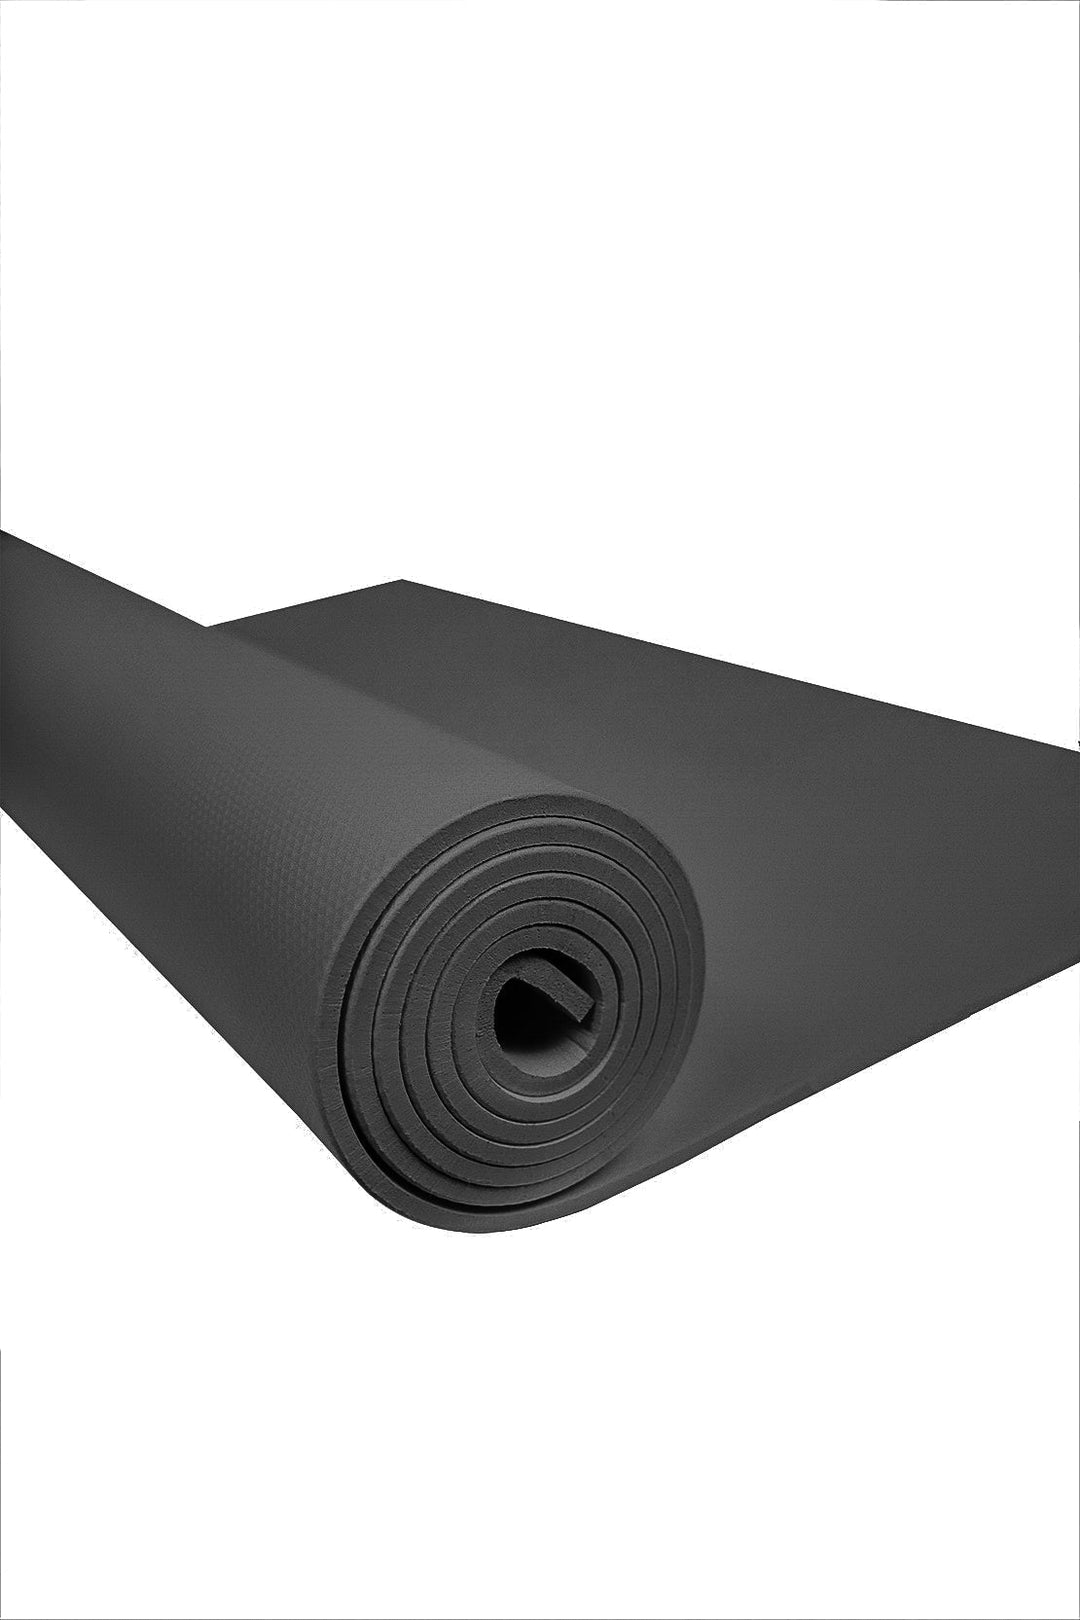 6 mm Thick Yoga Mat for Indoor and Outdoor Use, Gray - V Surfaces